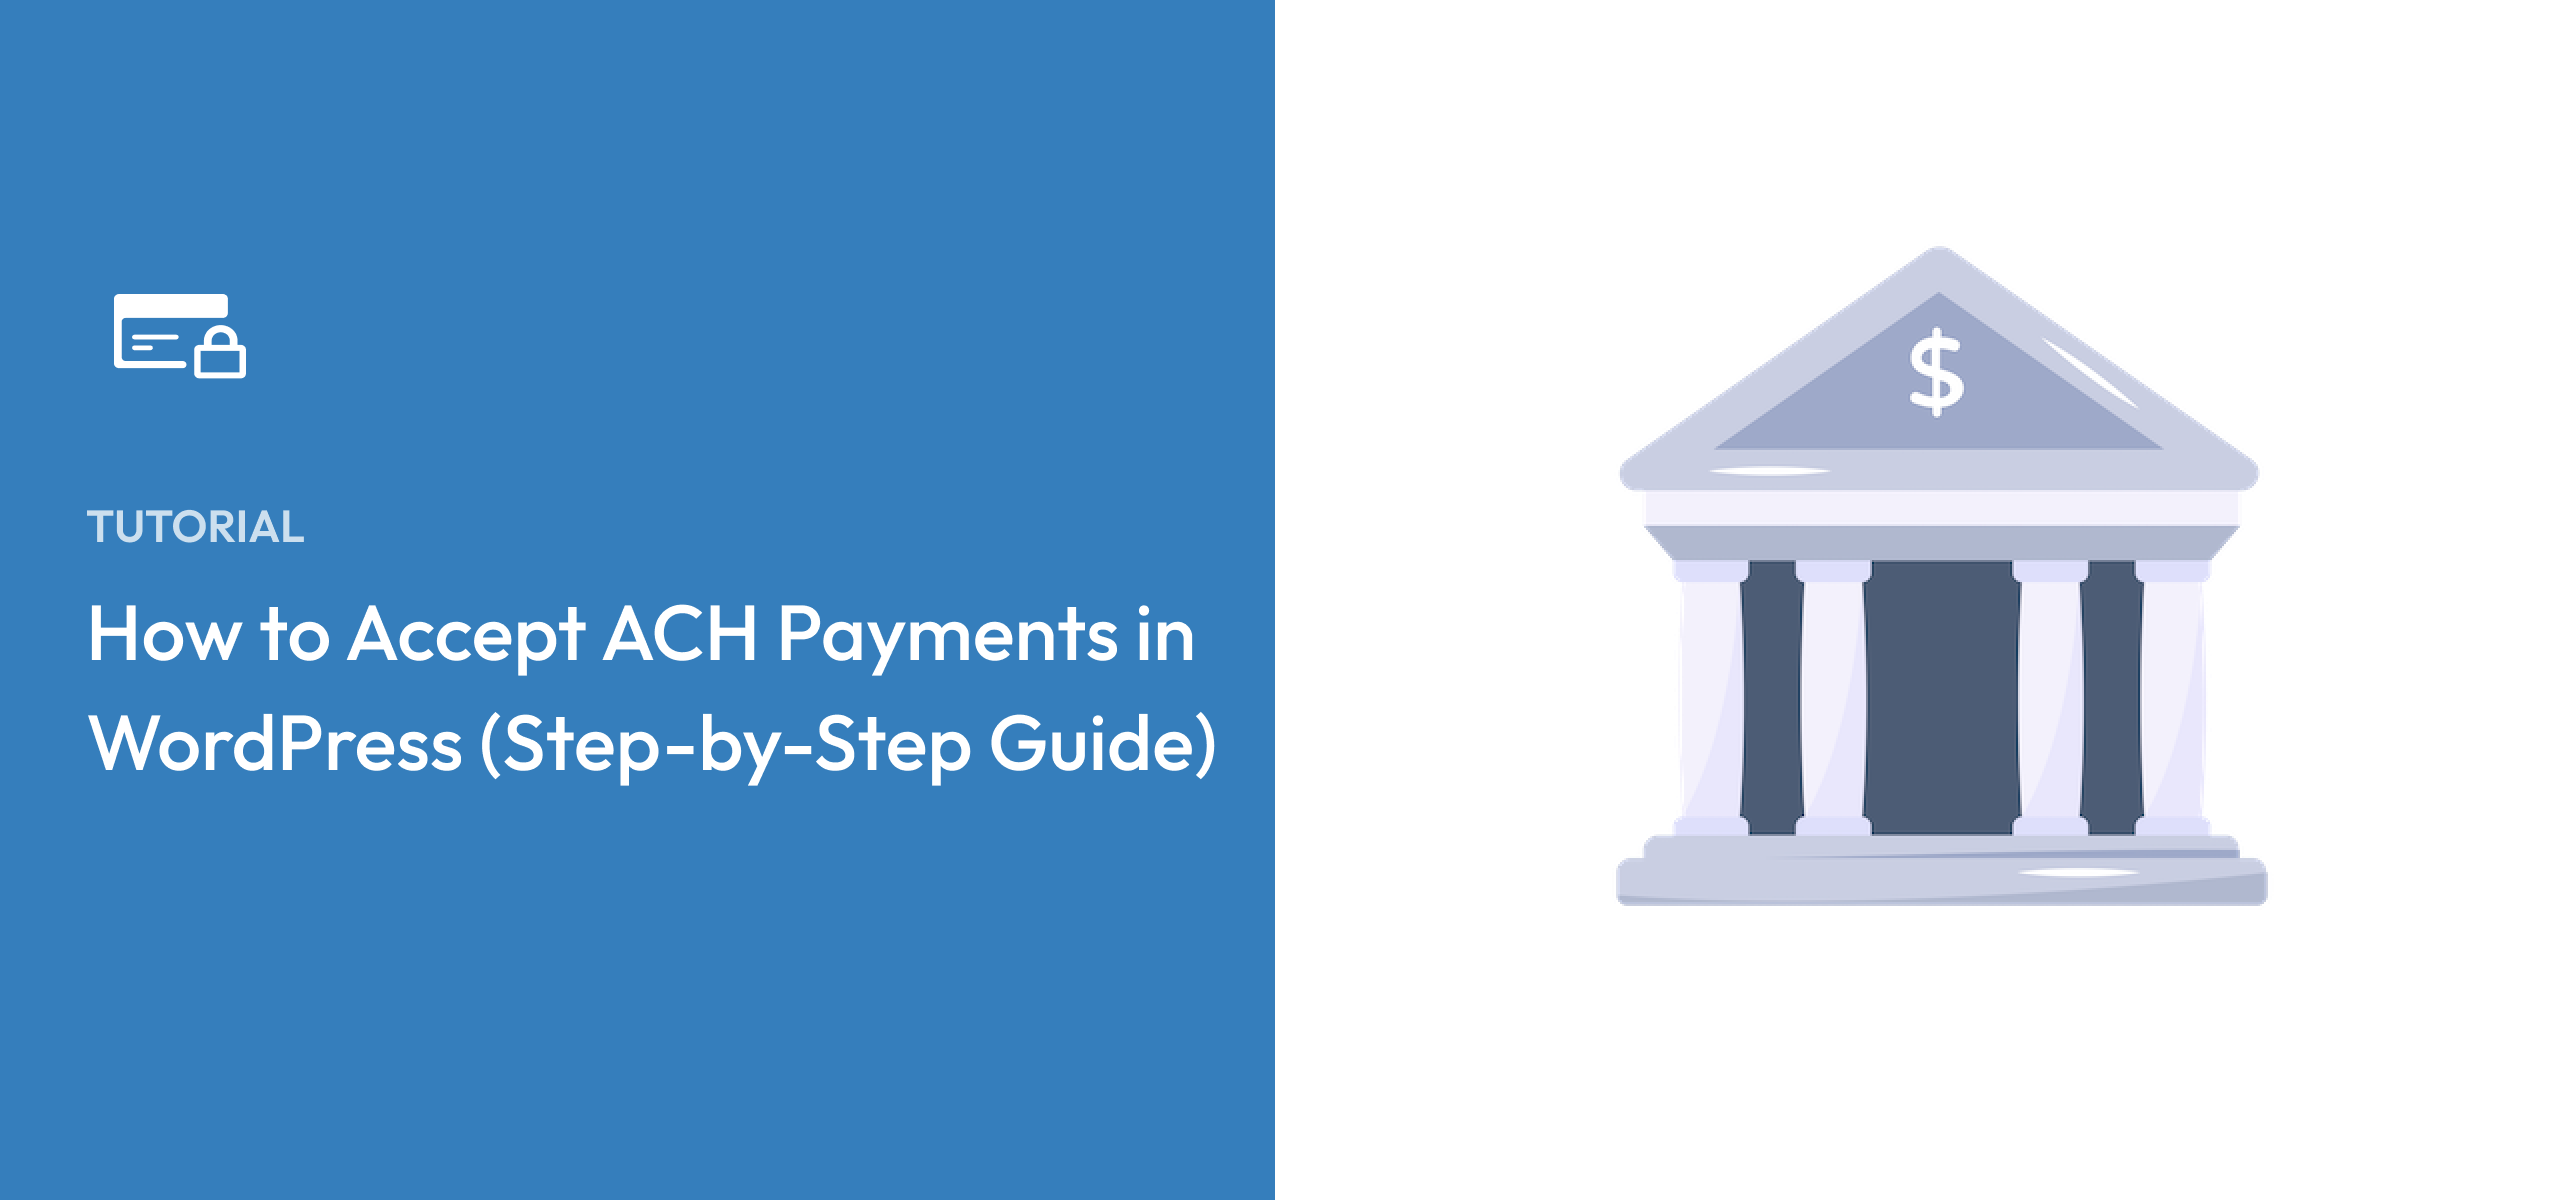 How to Accept ACH Payments in WordPress (Step-By-Step Guide)